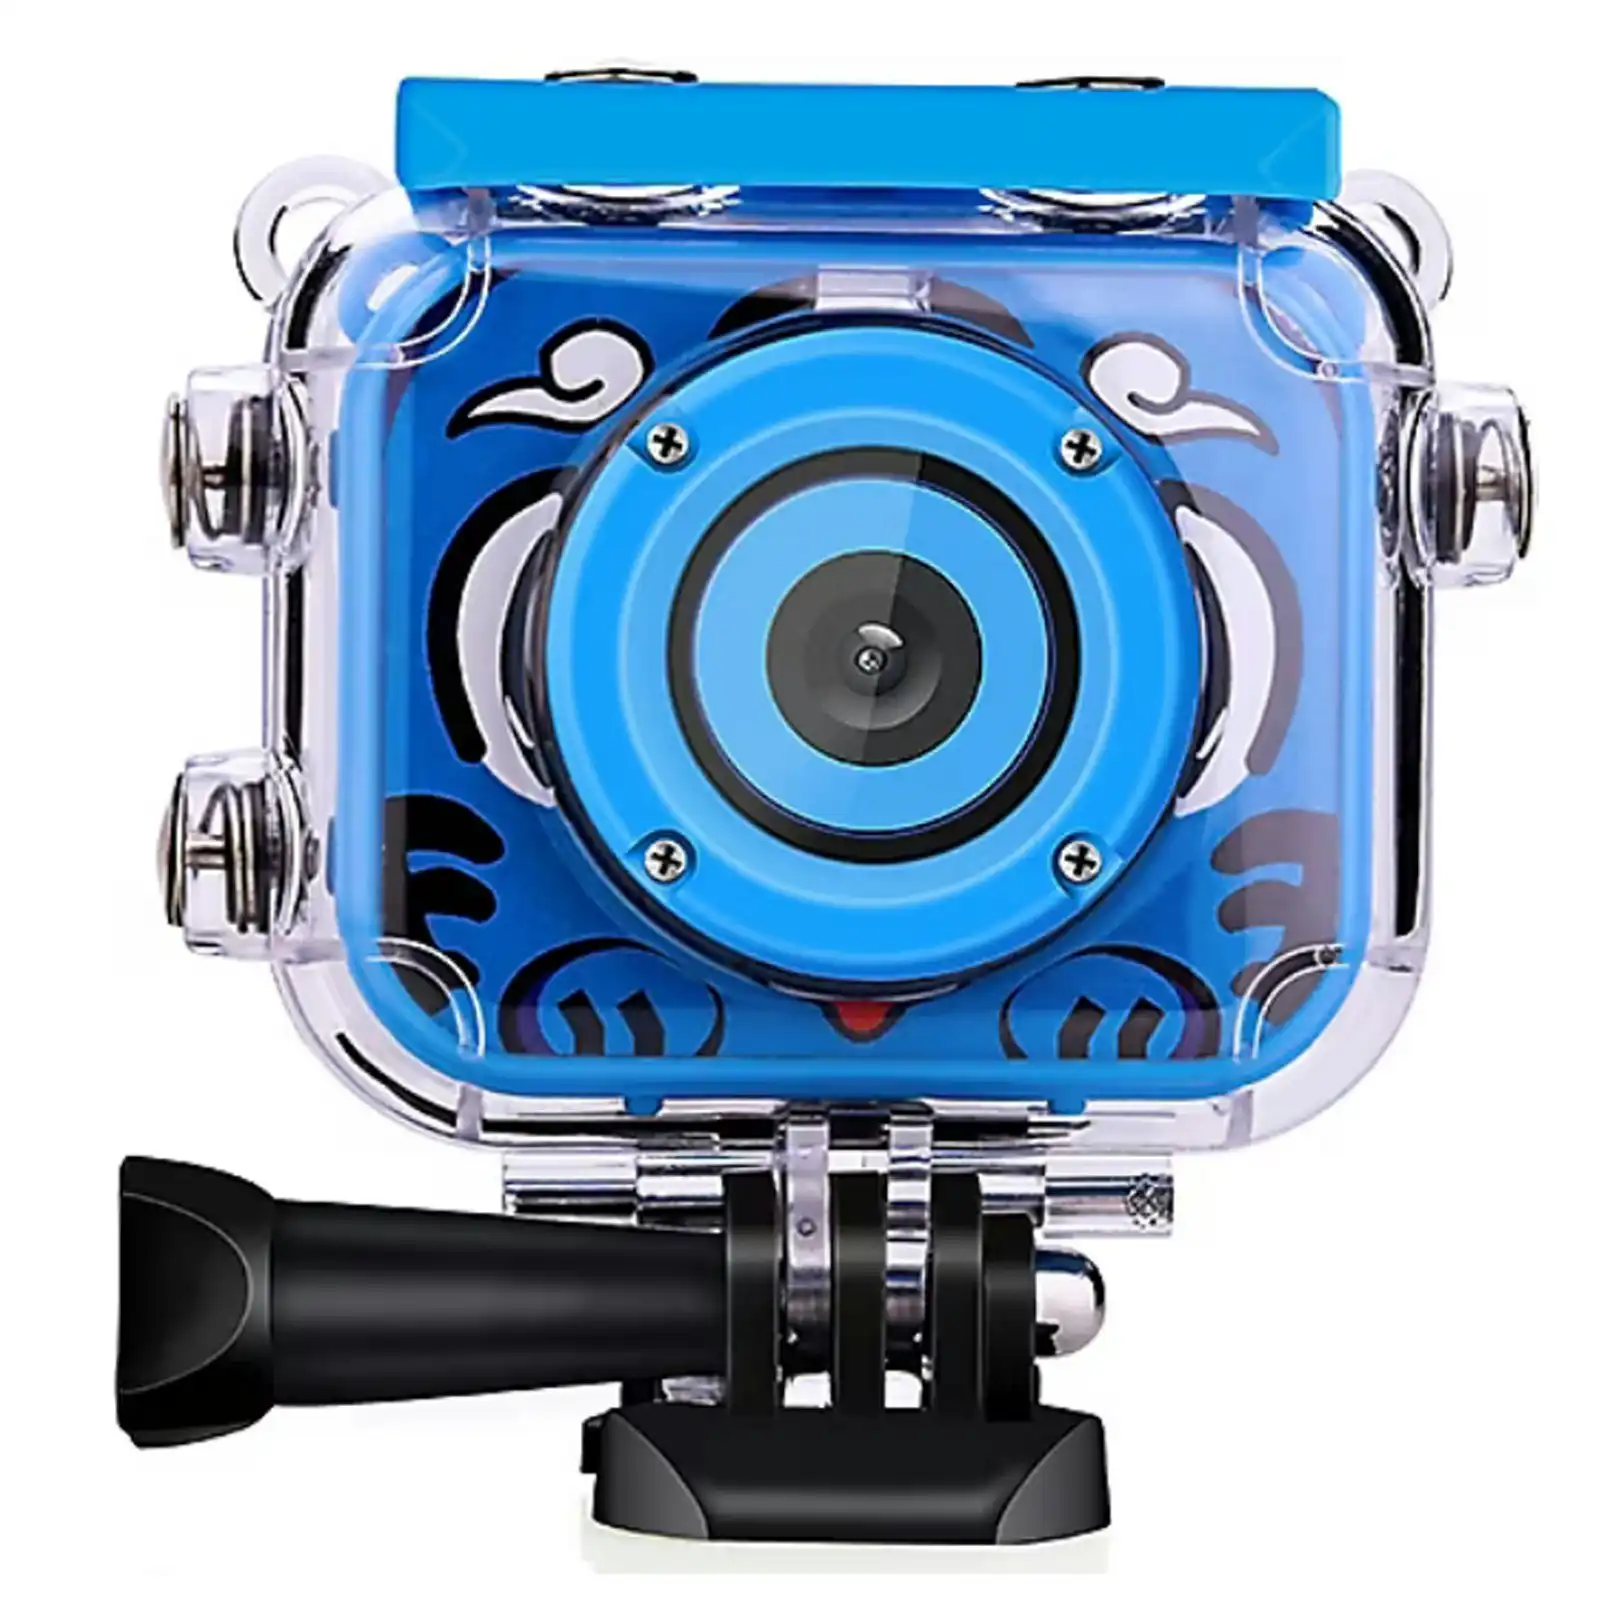 Todo 1080p FHD Kids Action Camera 30M Waterproof 2" LCD Action Cam - Blue